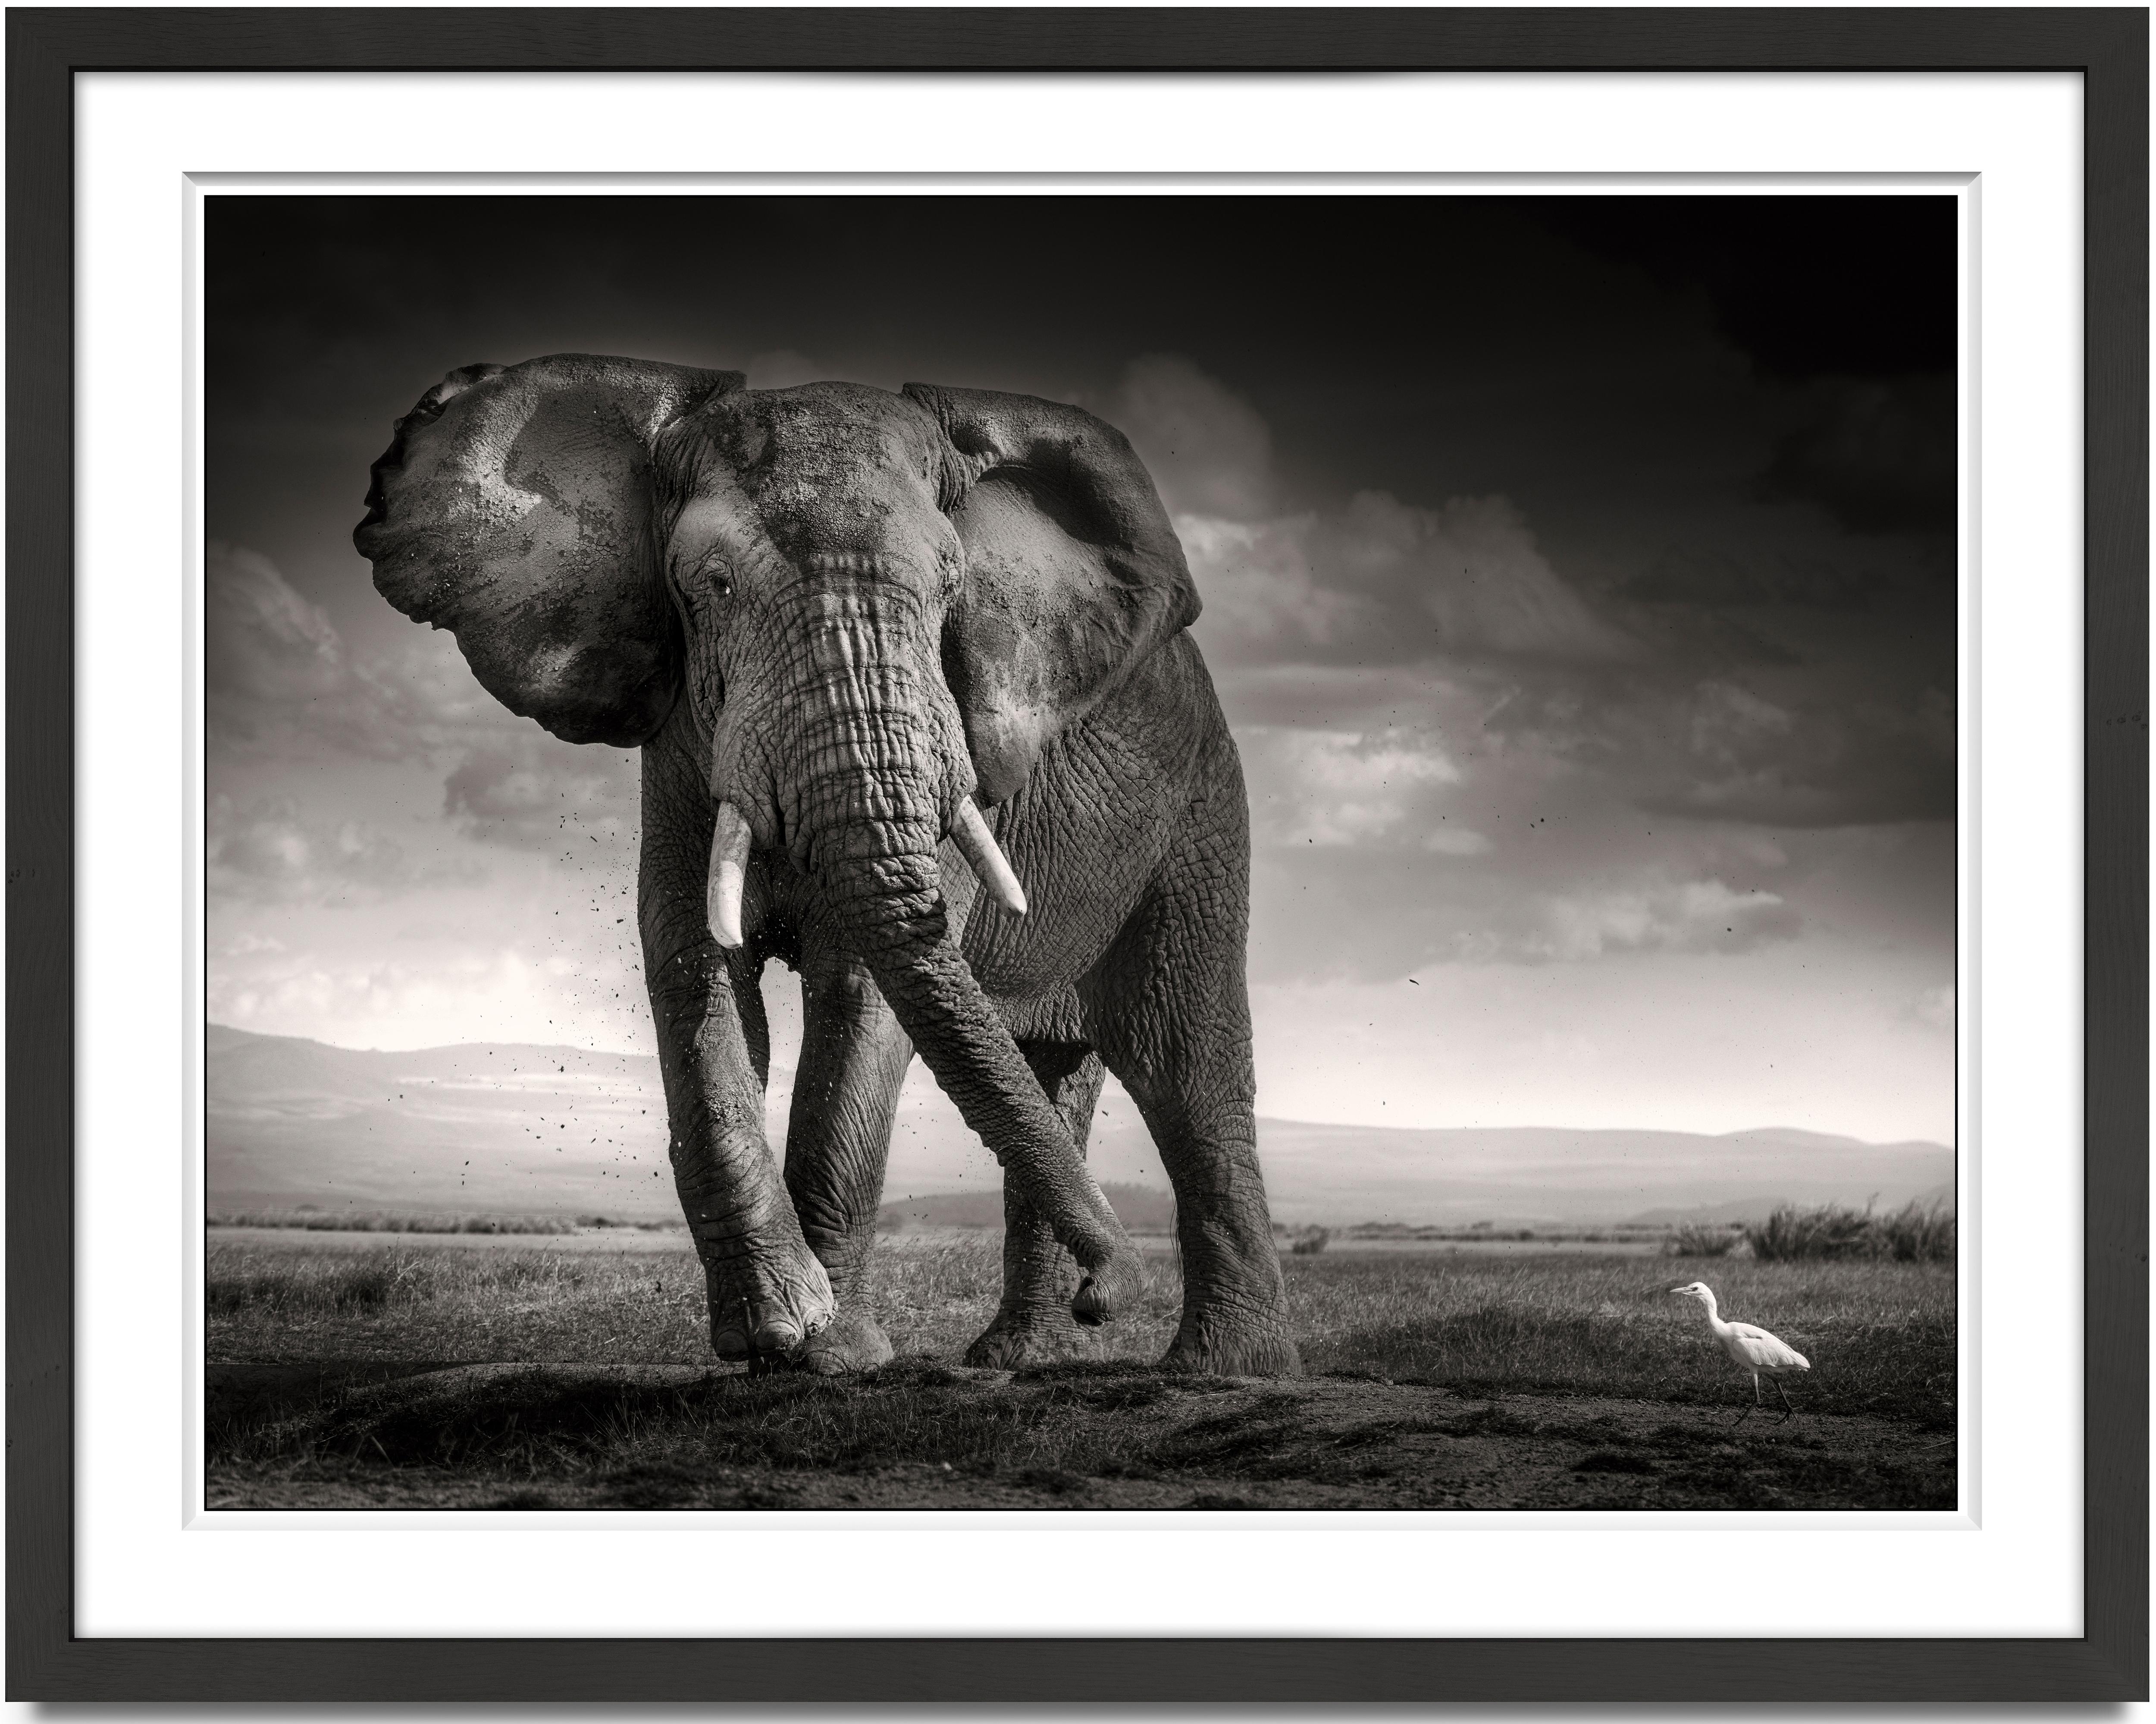 The bull and the bird II, Elephant, animal, black and white photography - Photograph by Joachim Schmeisser